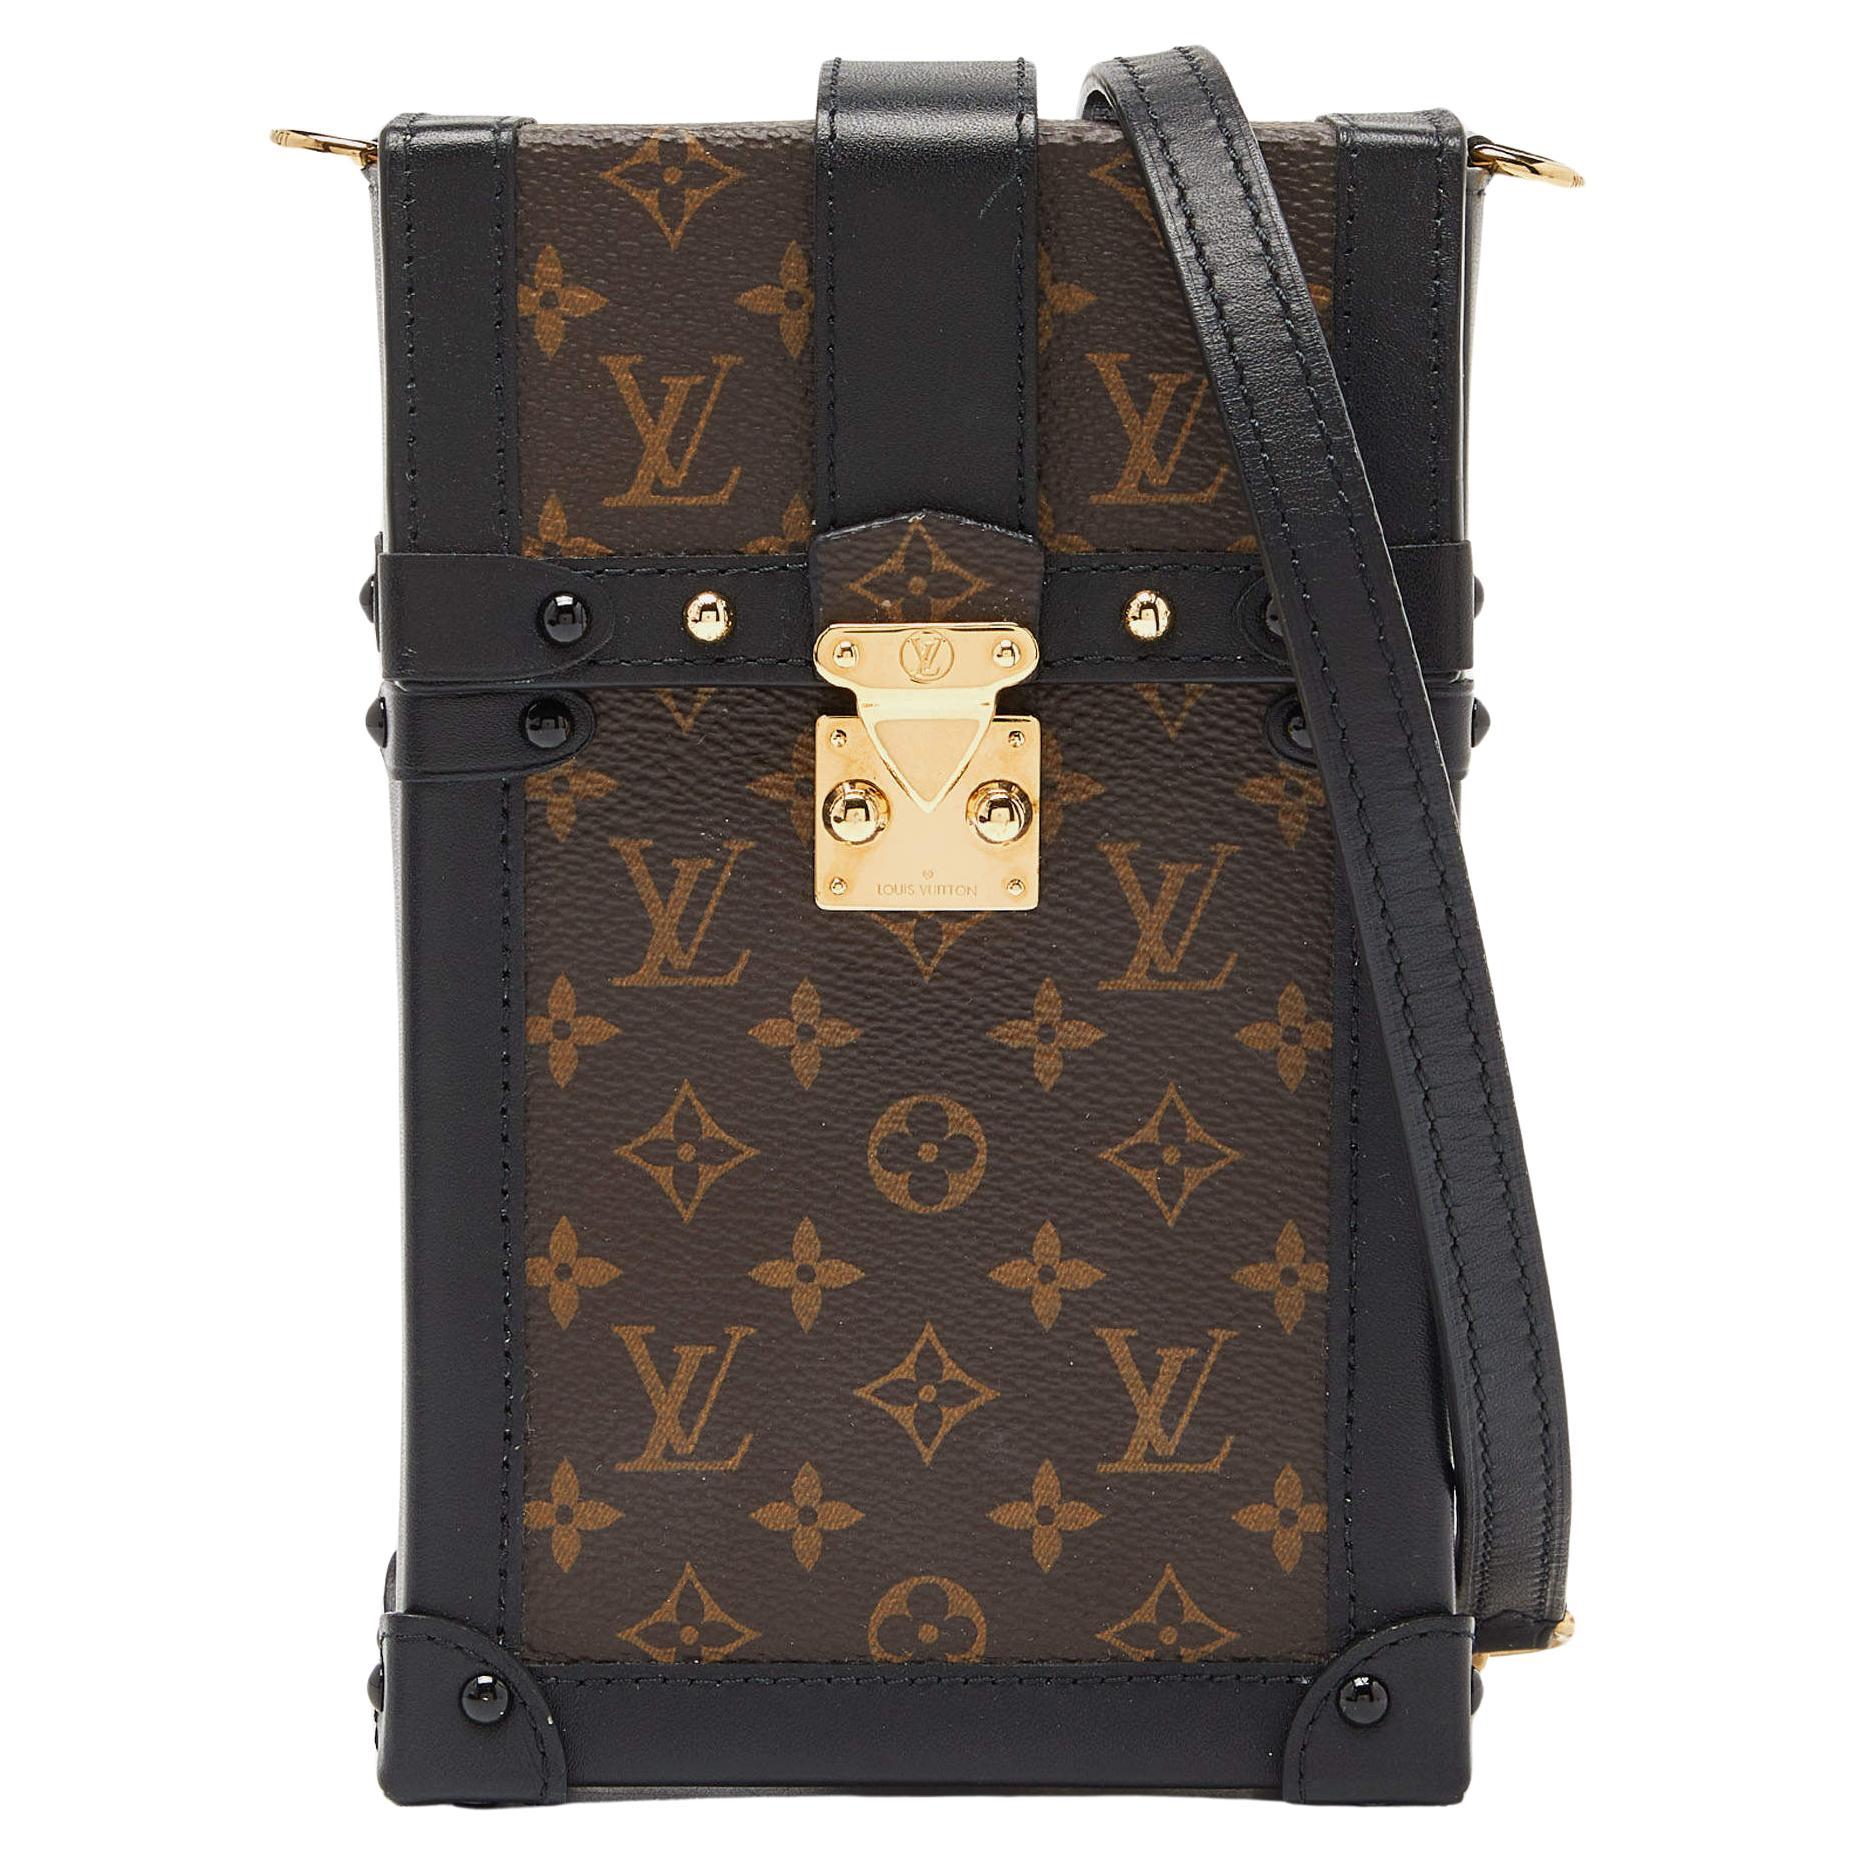 Sold at Auction: LOUIS VUITTON, LIMITED EDITION VIRGIL ABLOH TUFFETAGE  VERTICAL SOFT TRUNK, 2019